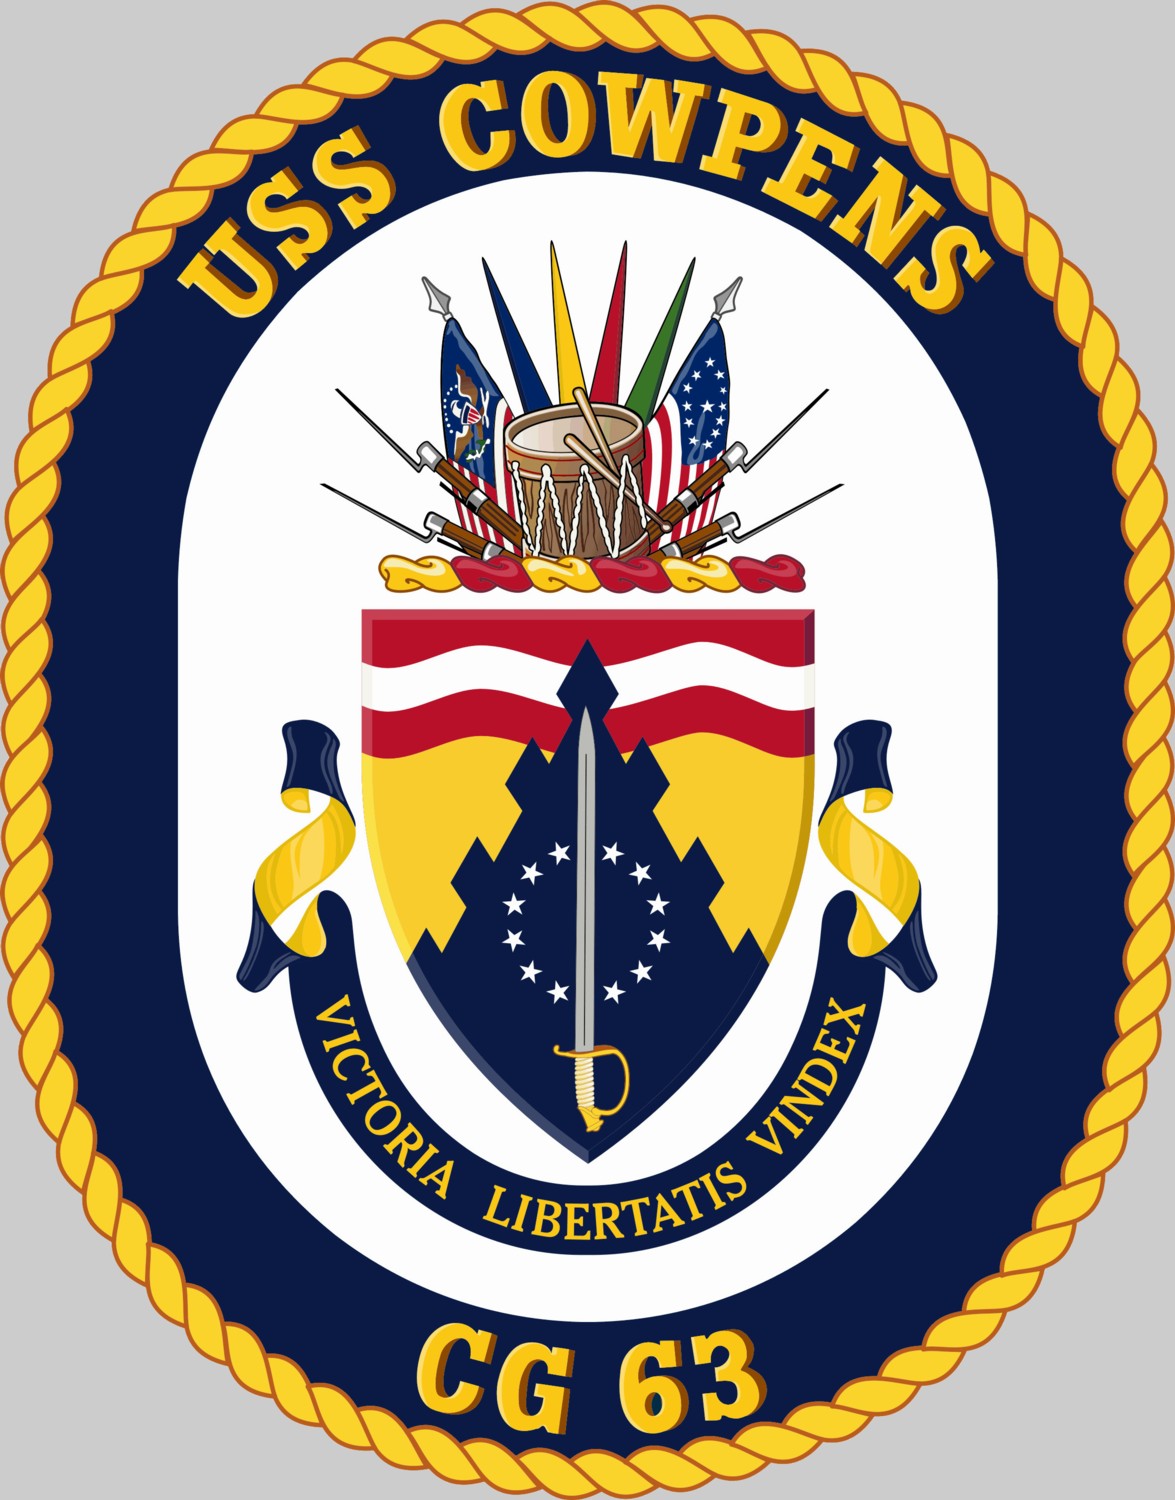 cg-63 uss cowpens insignia crest patch badge ticonderoga class guided missile cruiser aegis us navy 02x